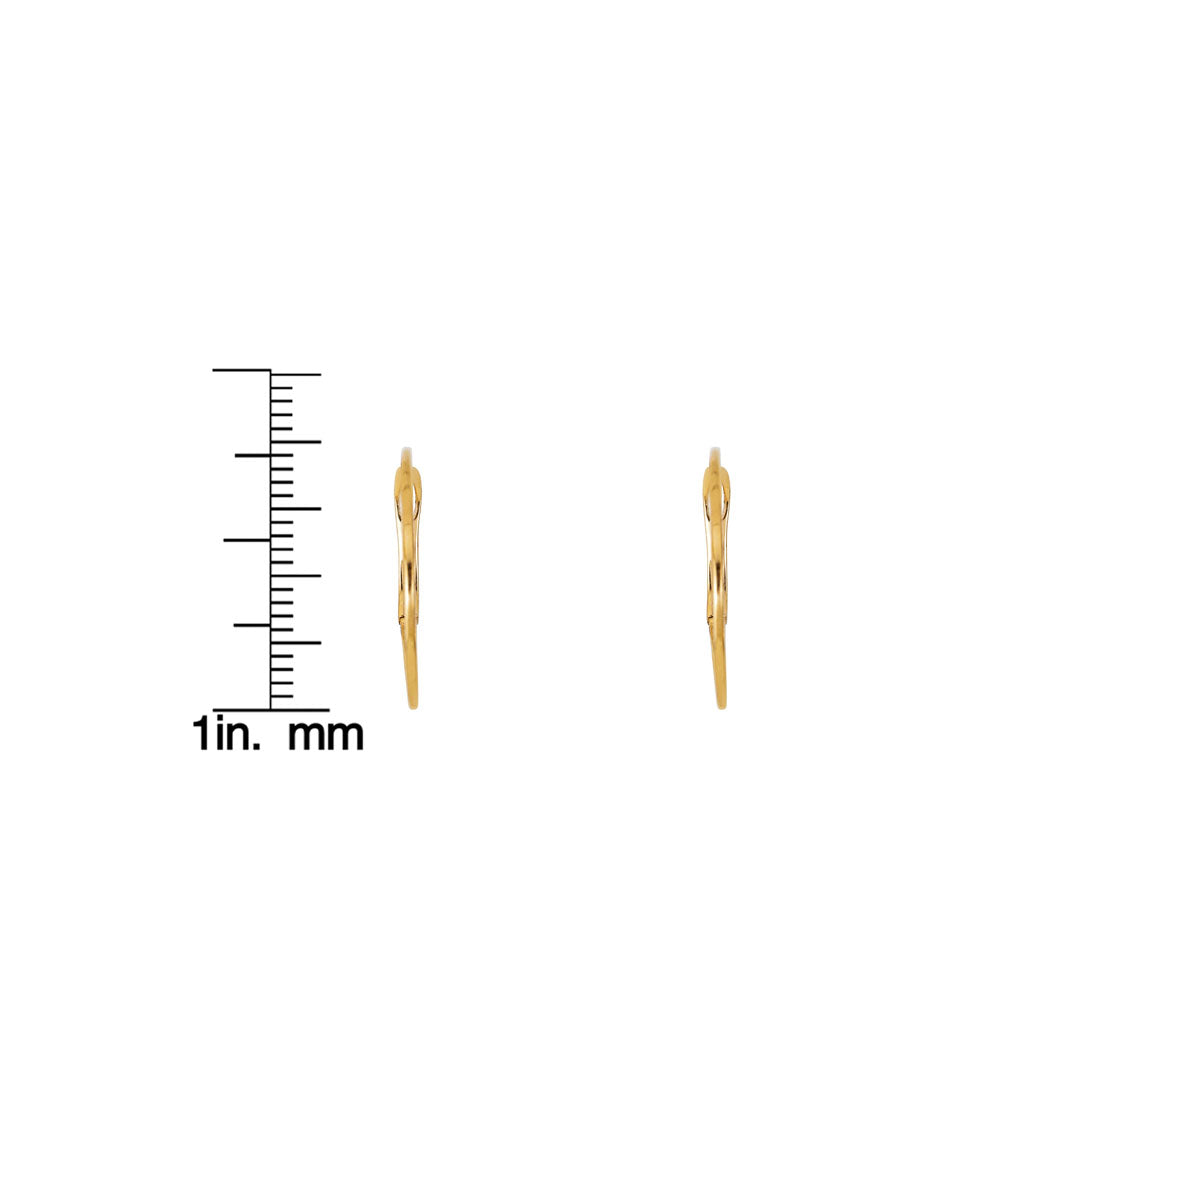 three quarters inch gold skinny gold hoop earrings with ruler